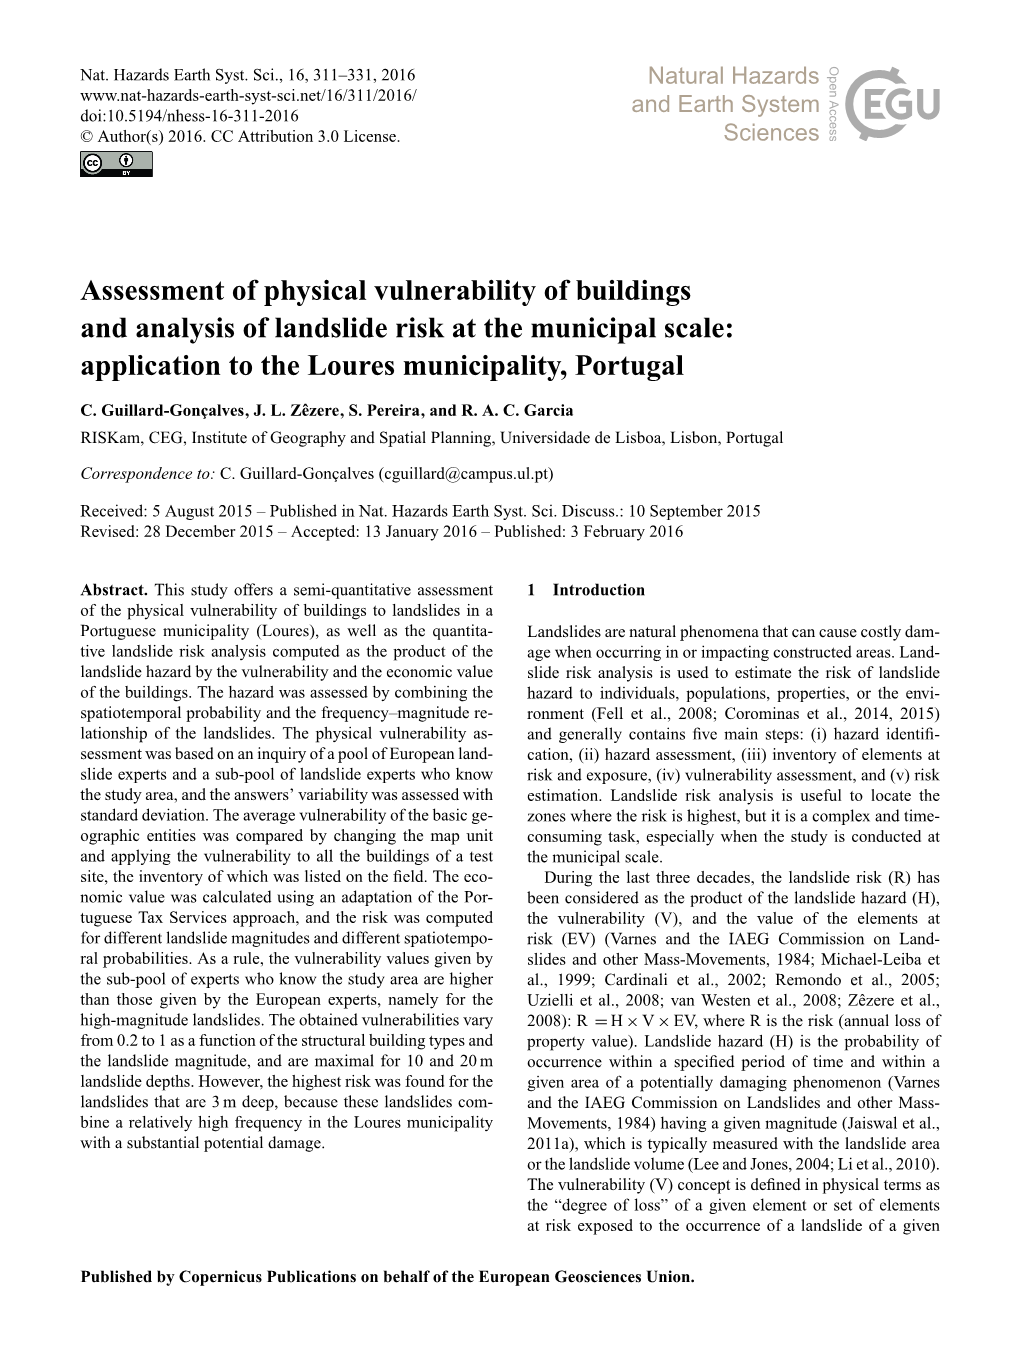 Article Is Available Online Vulnerability to Natural Hazards, P